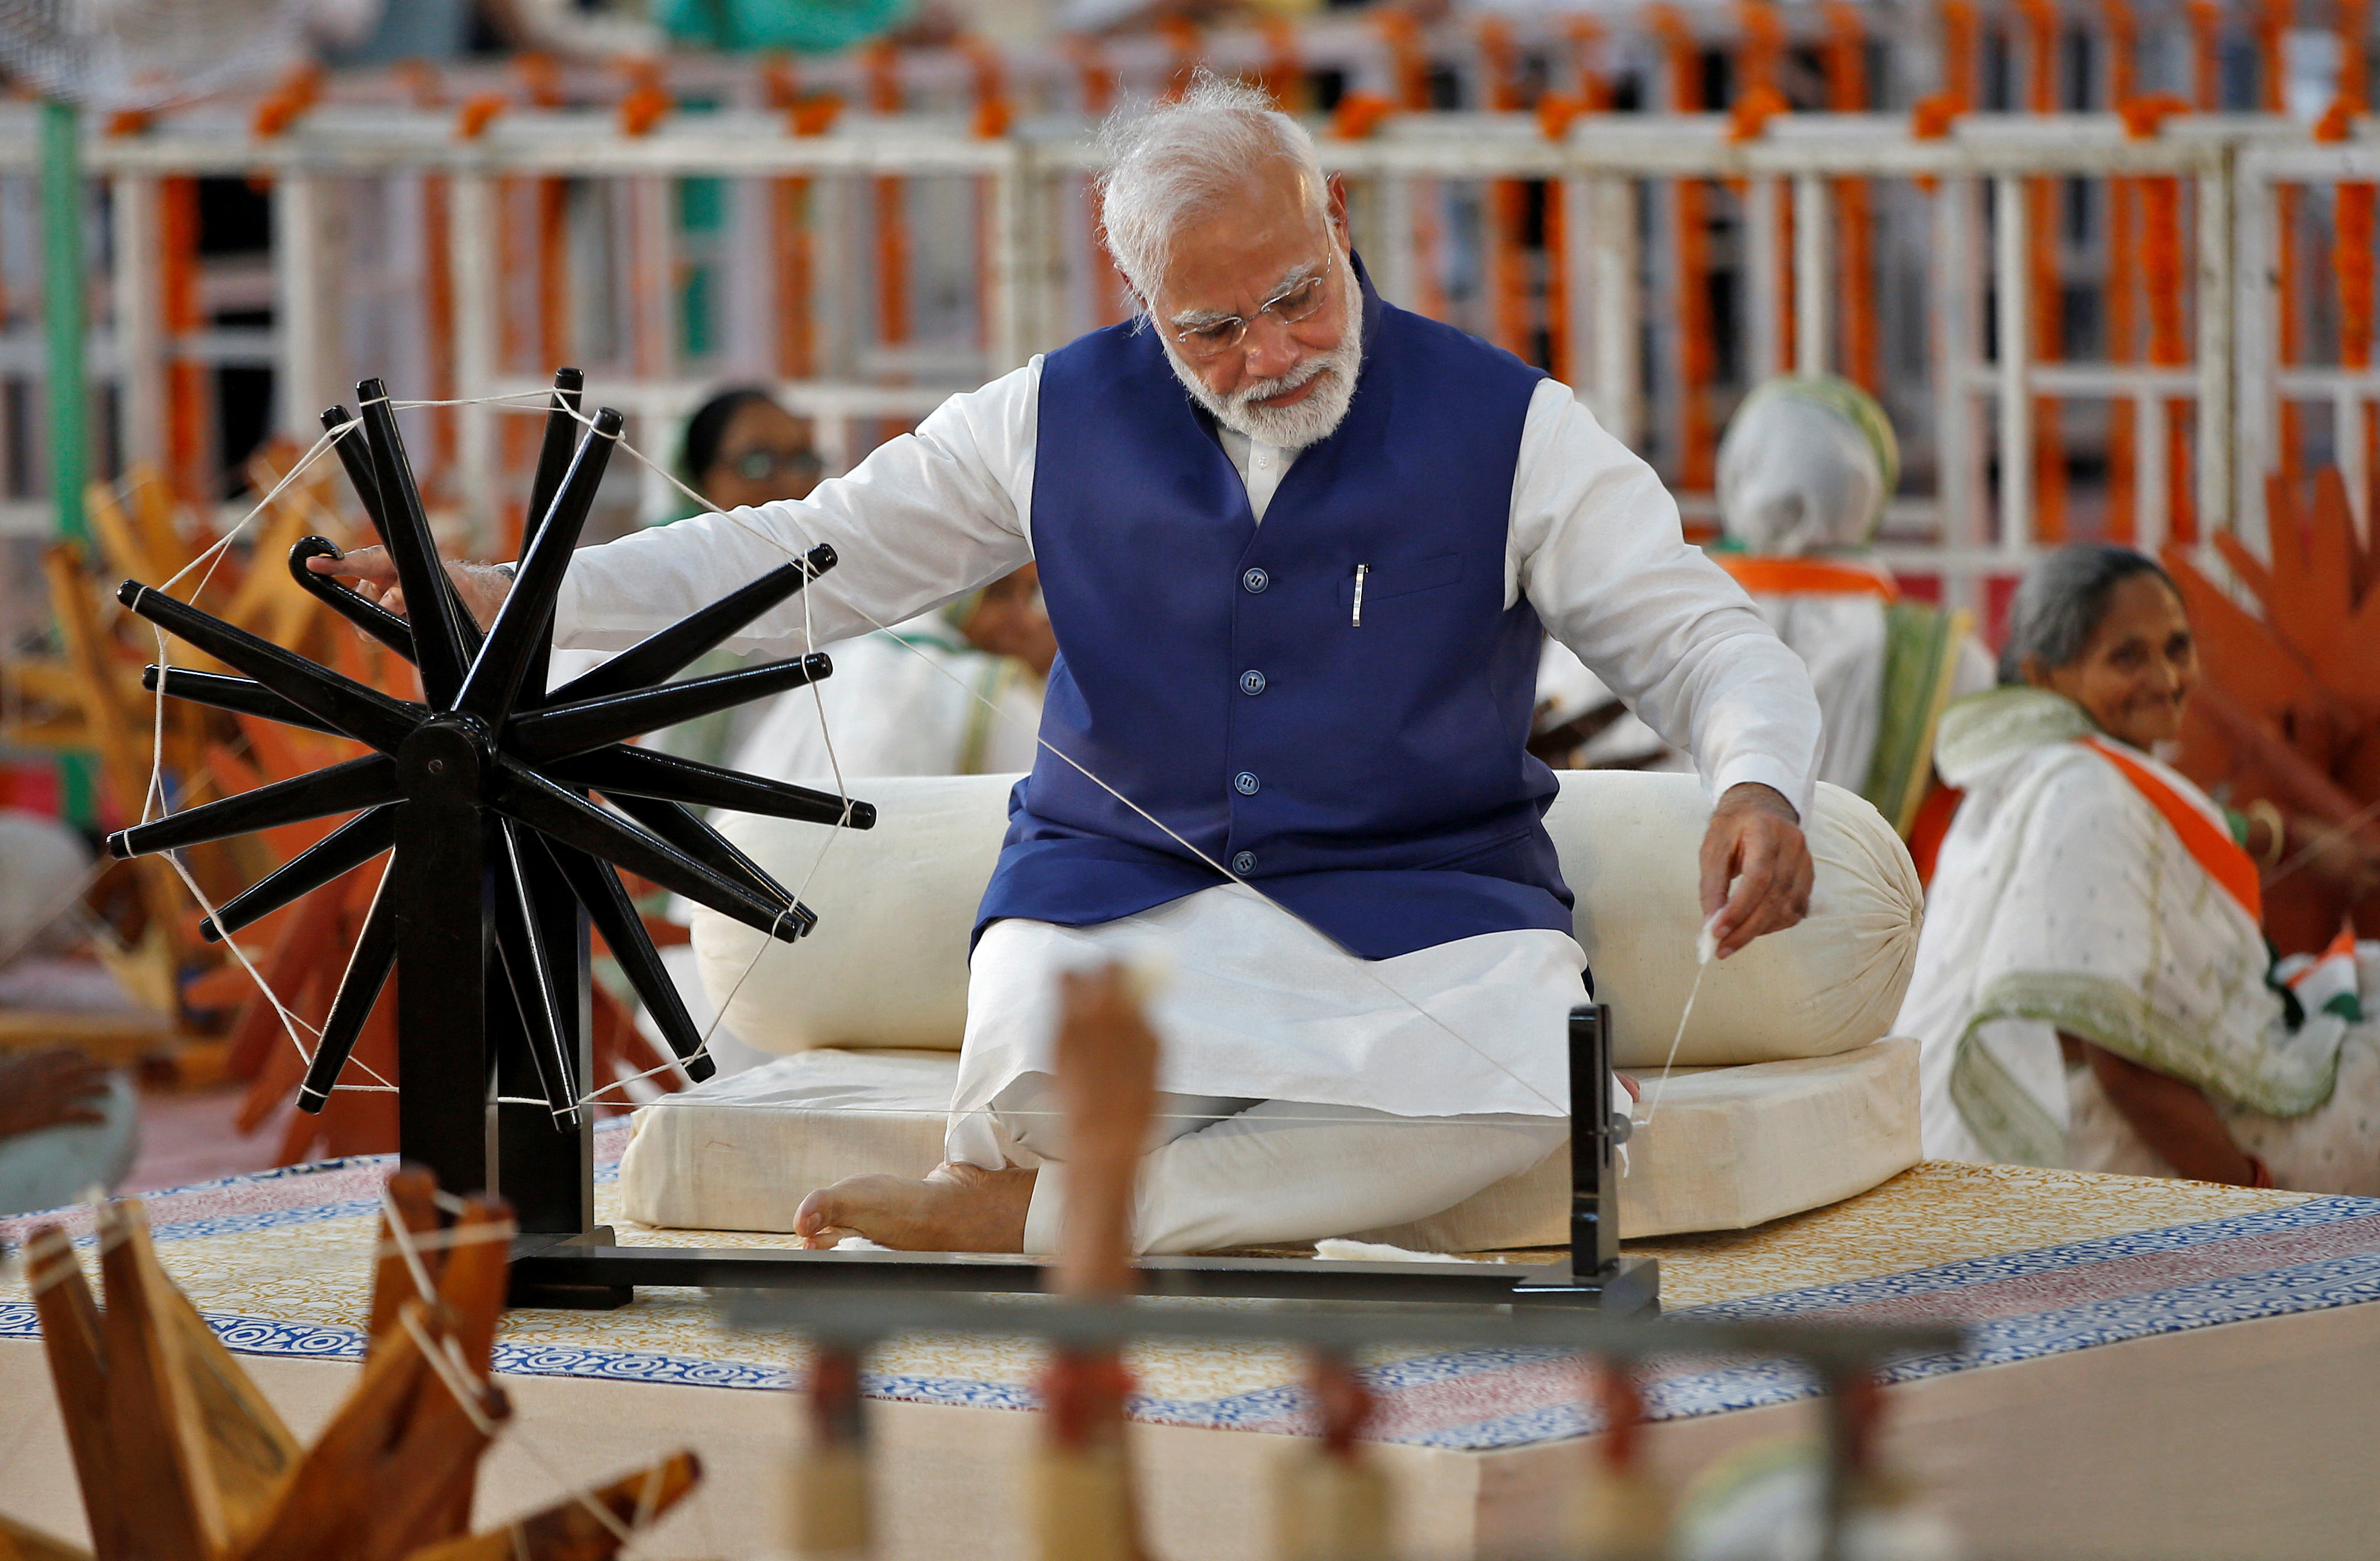 India's Prime Minister Narendra Modi spins cotton on a wheel, in Ahmedabad